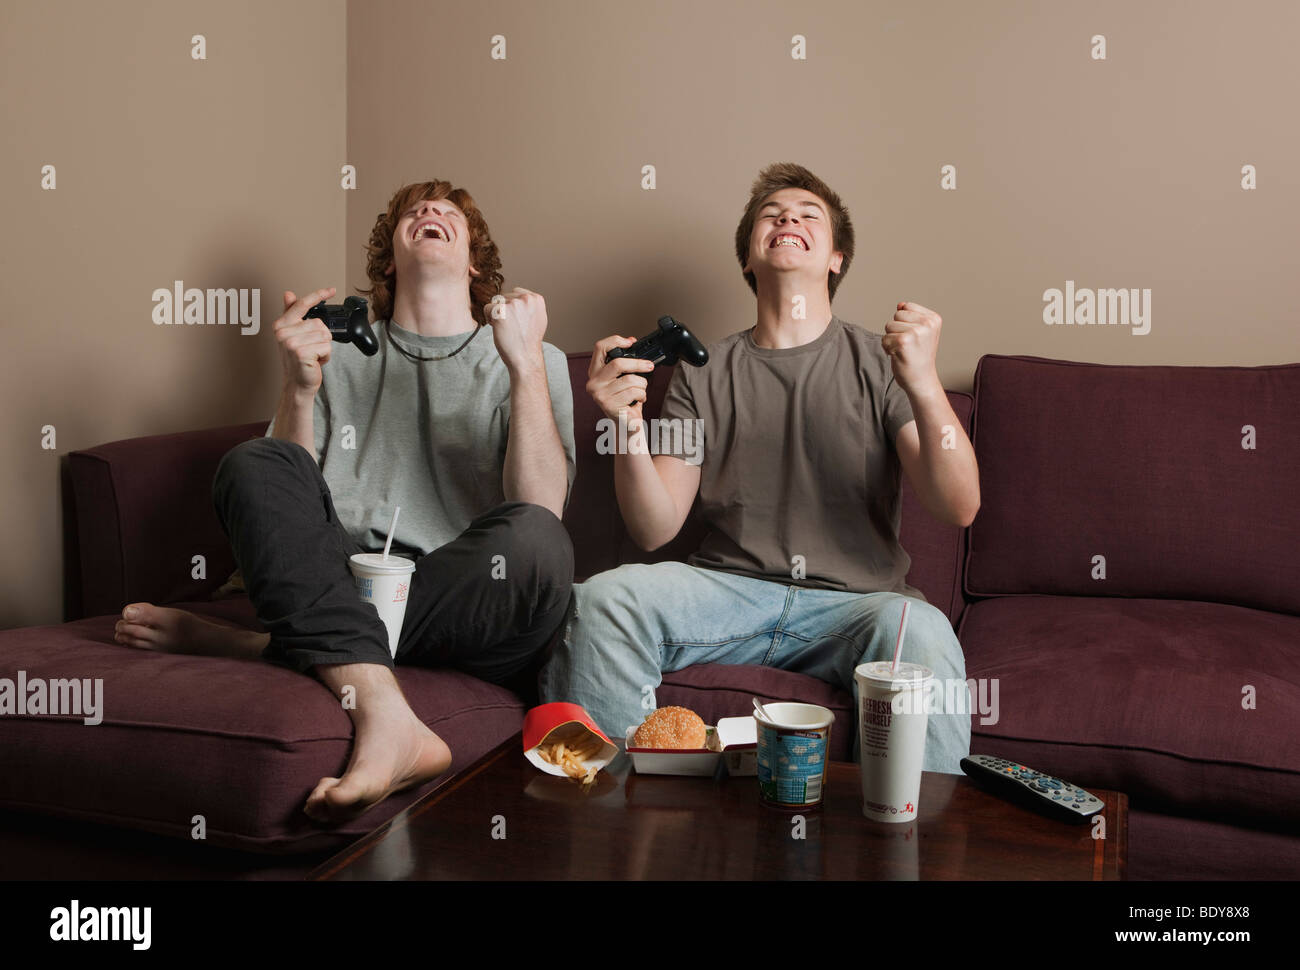 Boys playing video game Stock Photo